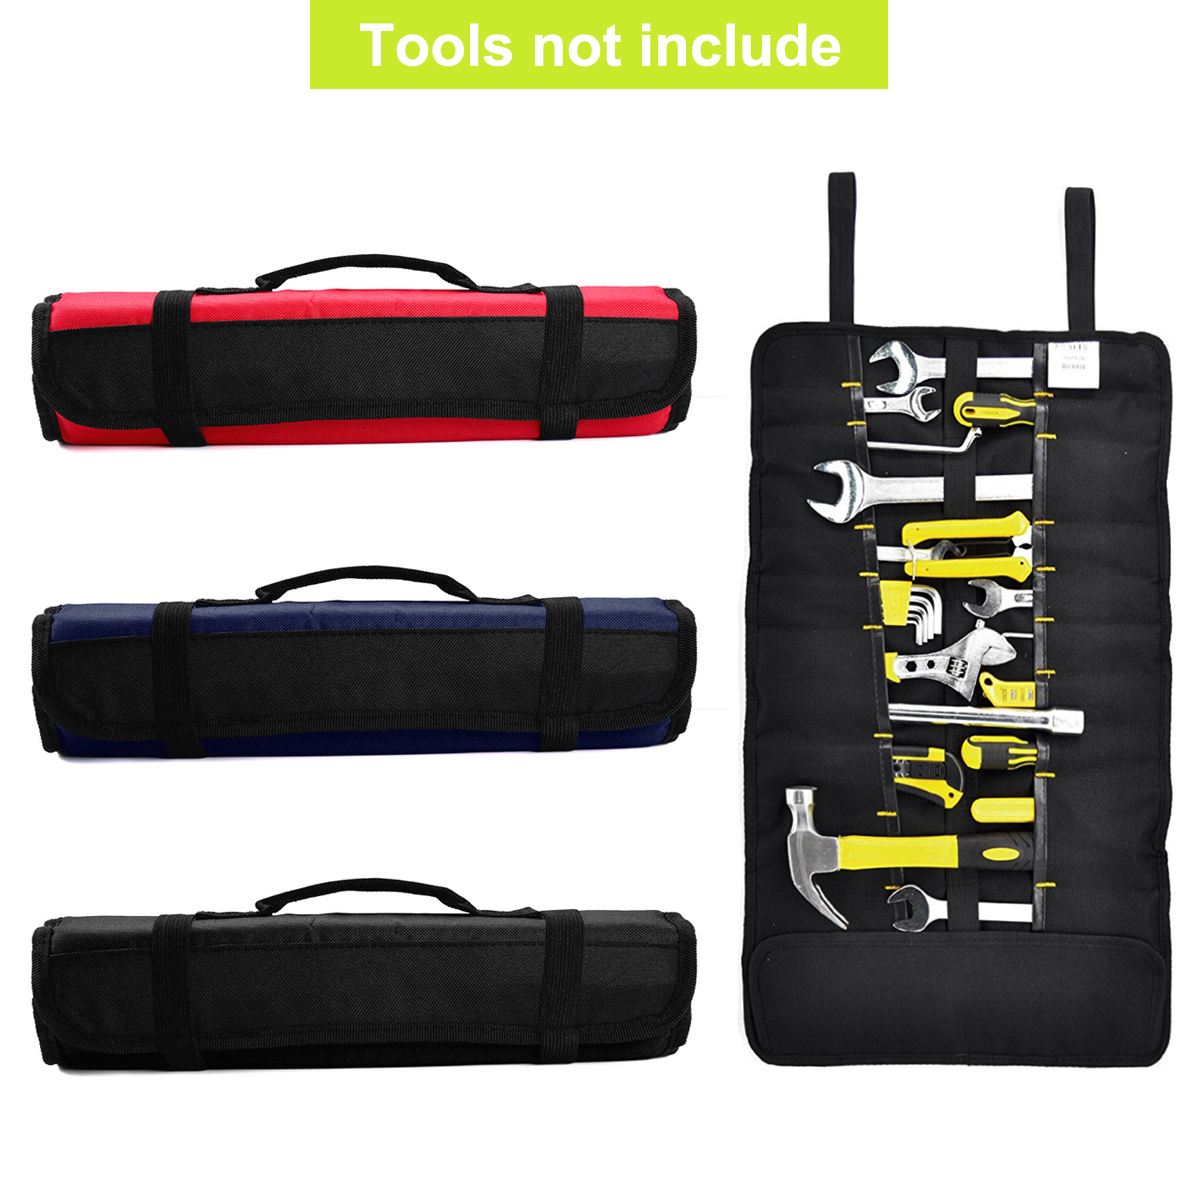 22 Pockets Hardware Tools Roll Bag Carry Pouch for Electricians Carpenters - Black